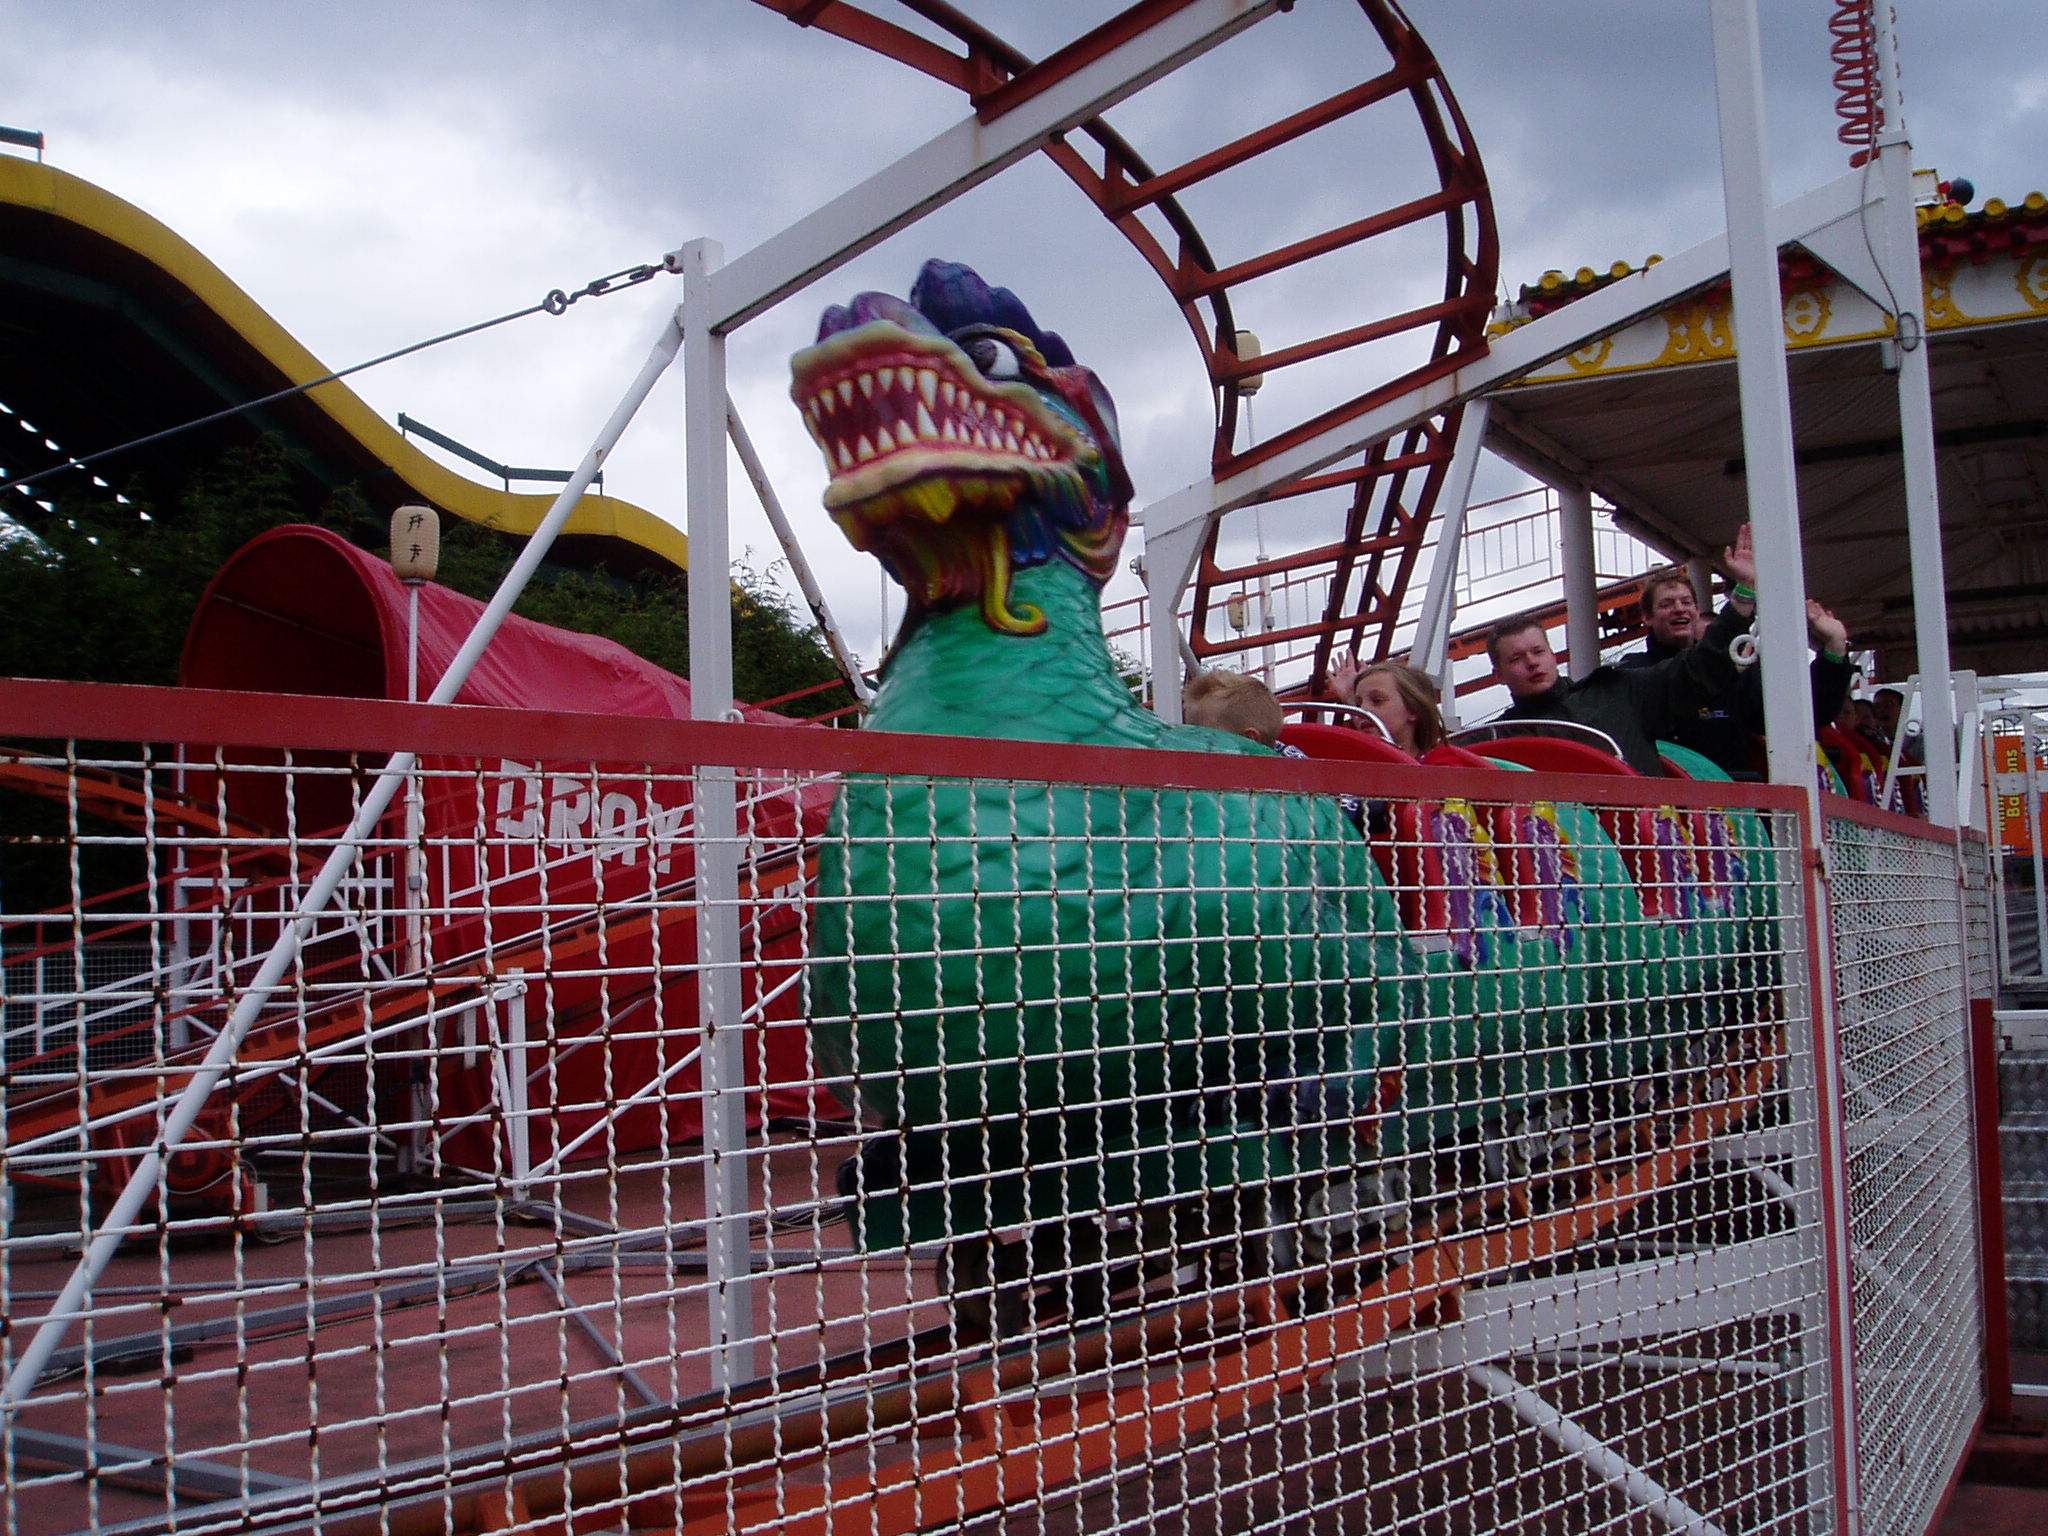 You are currently viewing Super Dragon (Drayton Manor)